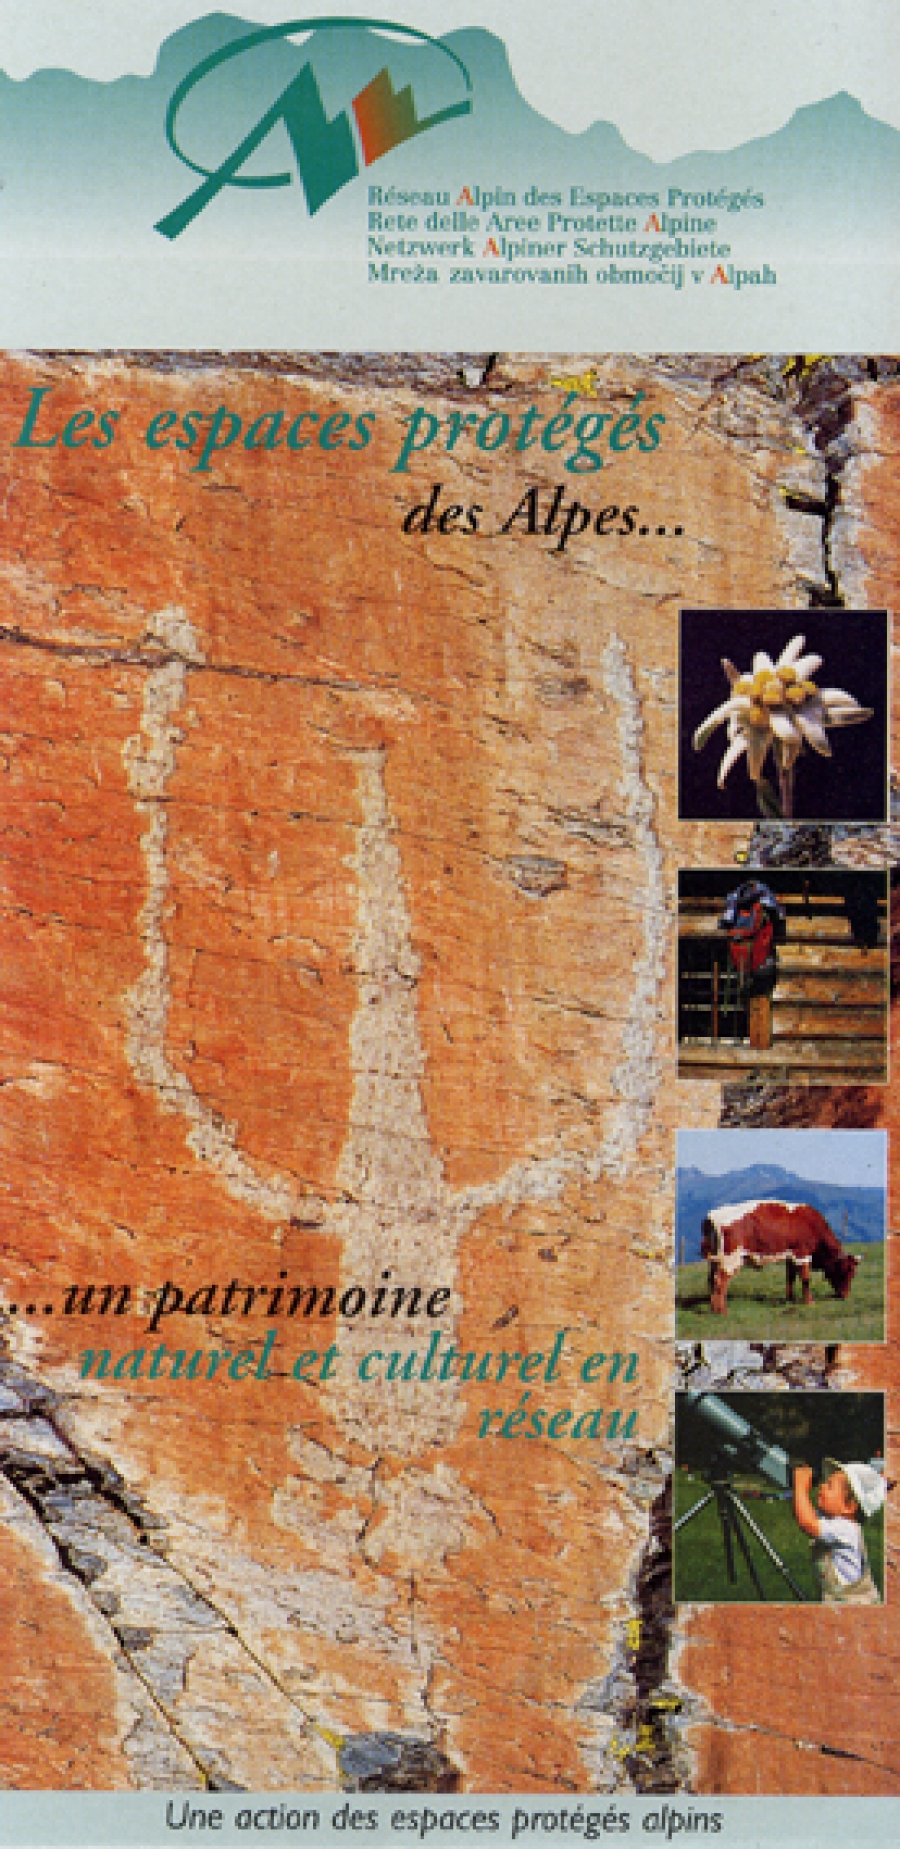 Alpine Protected Areas: A Network for Natural and Cultural Heritage